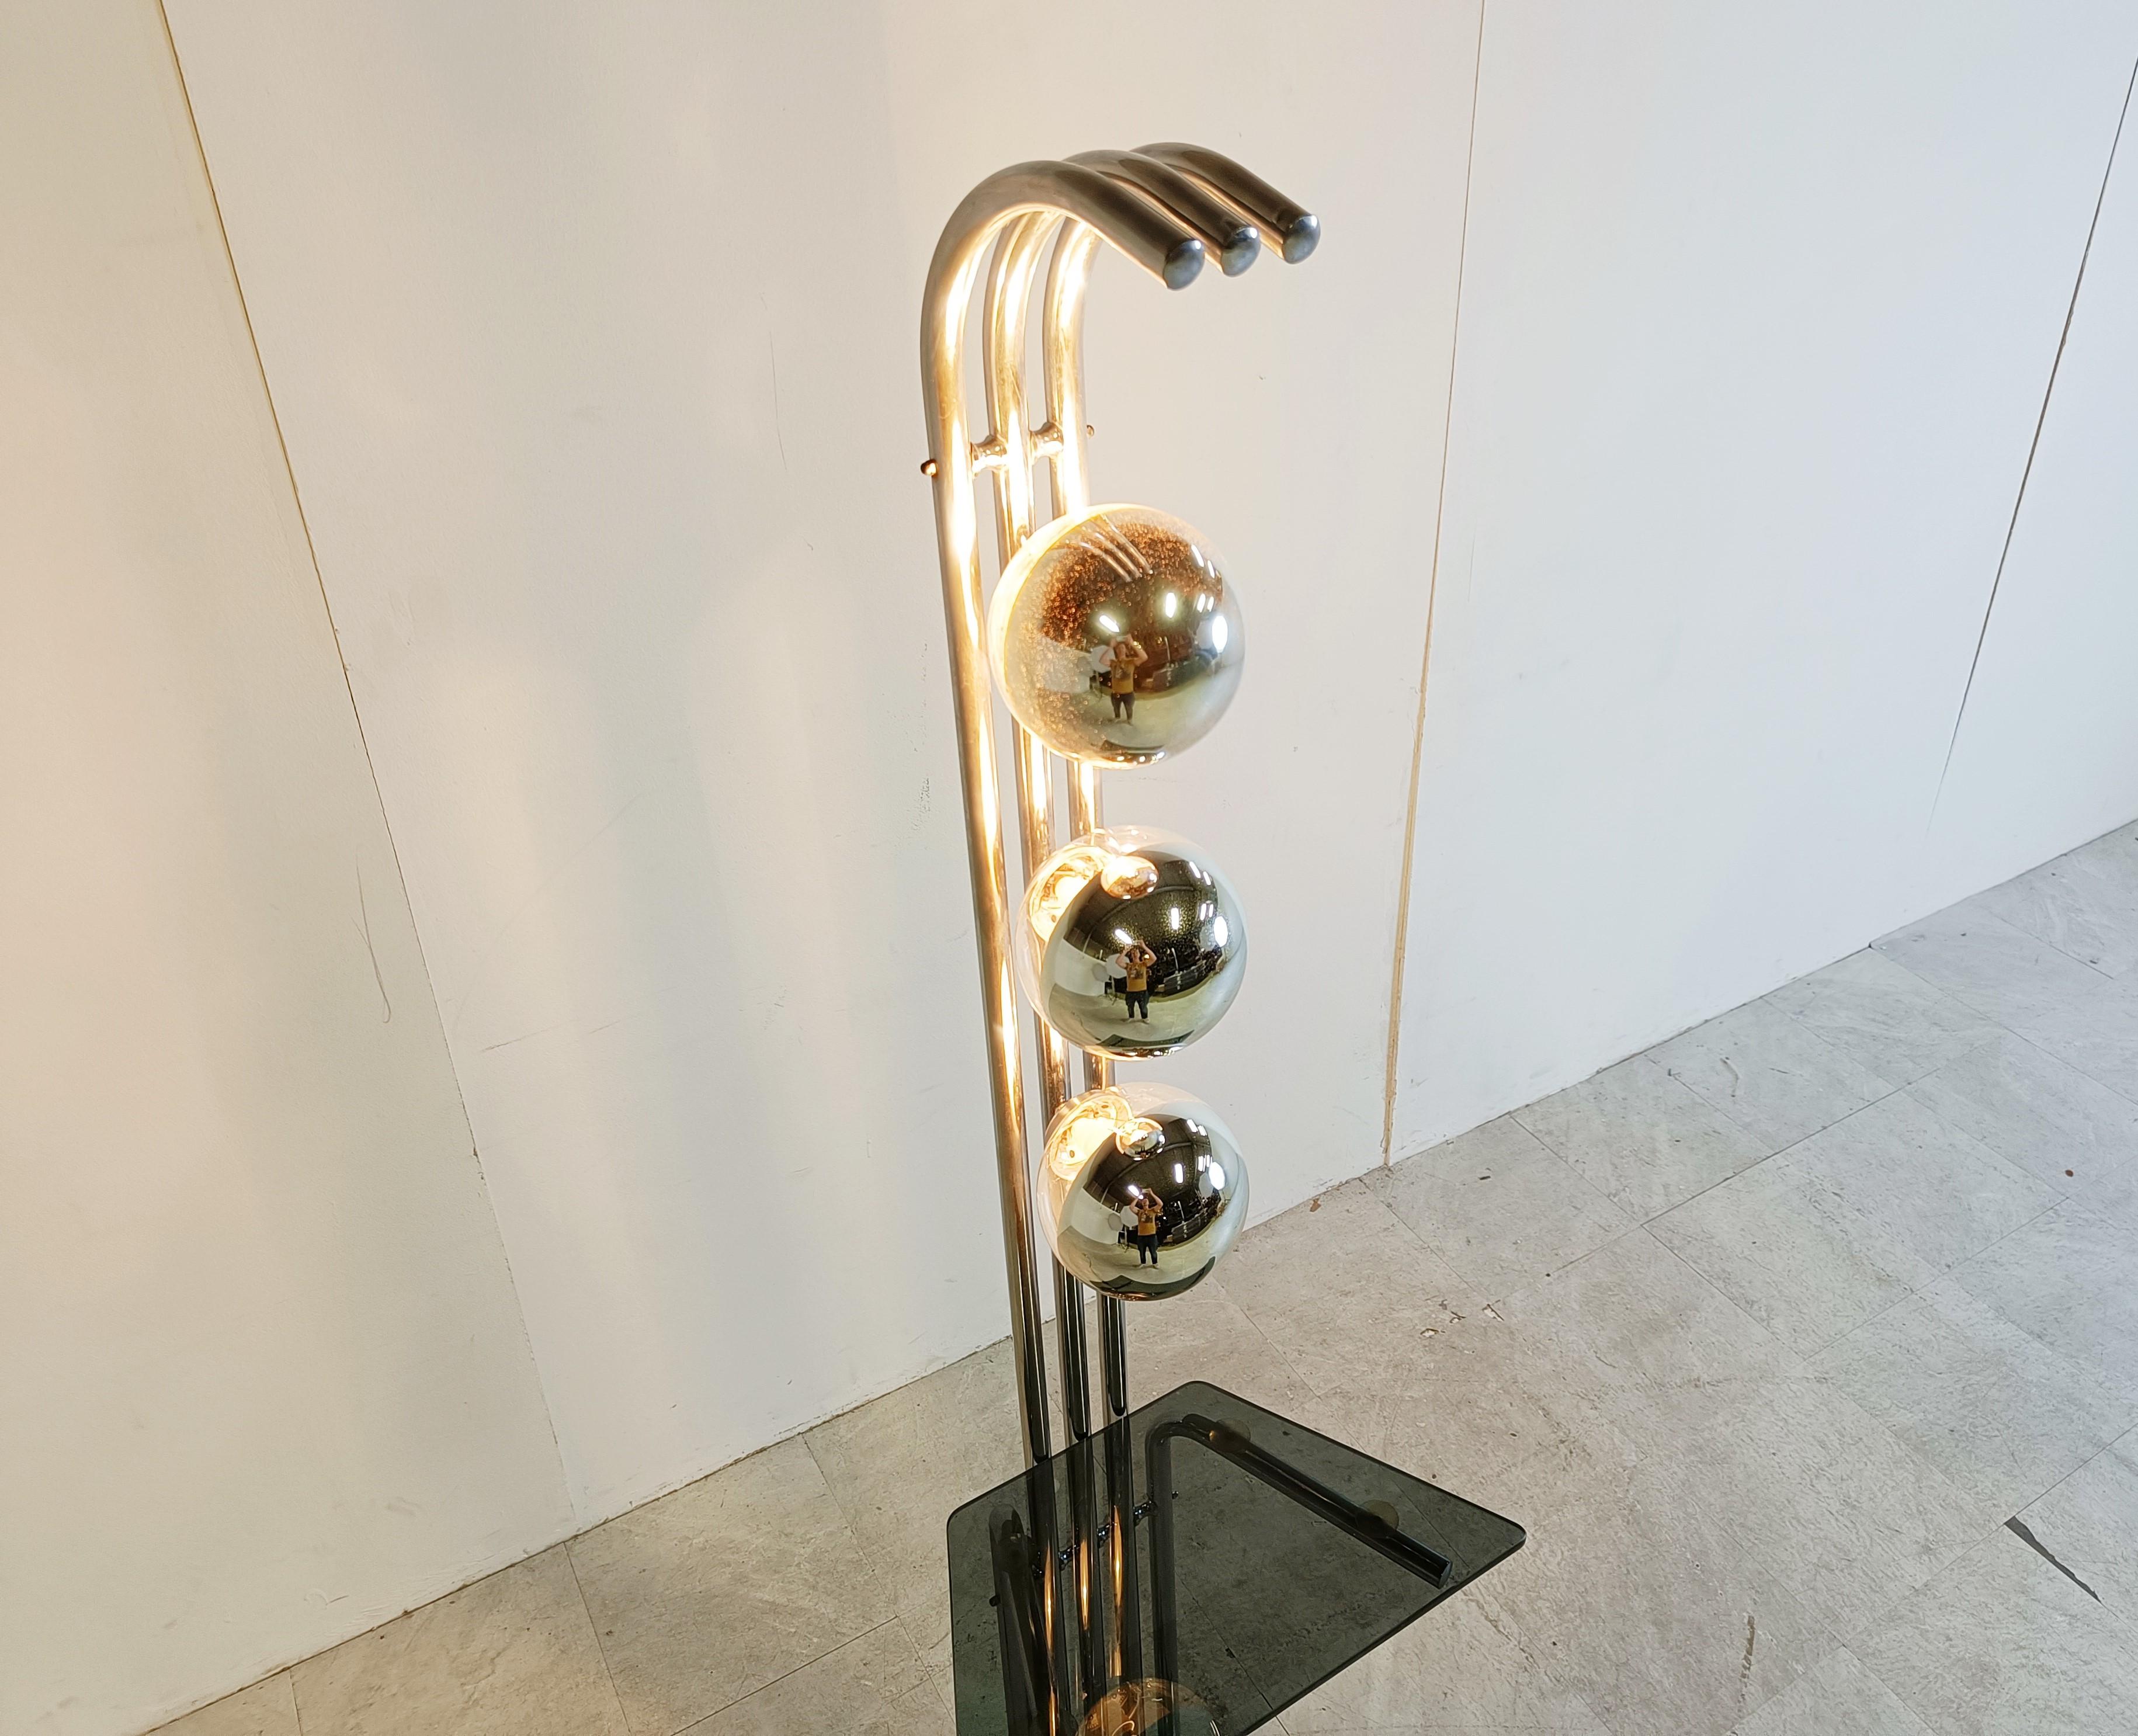 Mid century chromed floor lamp with 3 glass reflective glass globes and a smoked glass shelf.

The lamp has a nice space age vibe.

Good condition, tested and ready to use with 3 E14 light bulbs

1970s - Italy

Height: 168cm/66.14